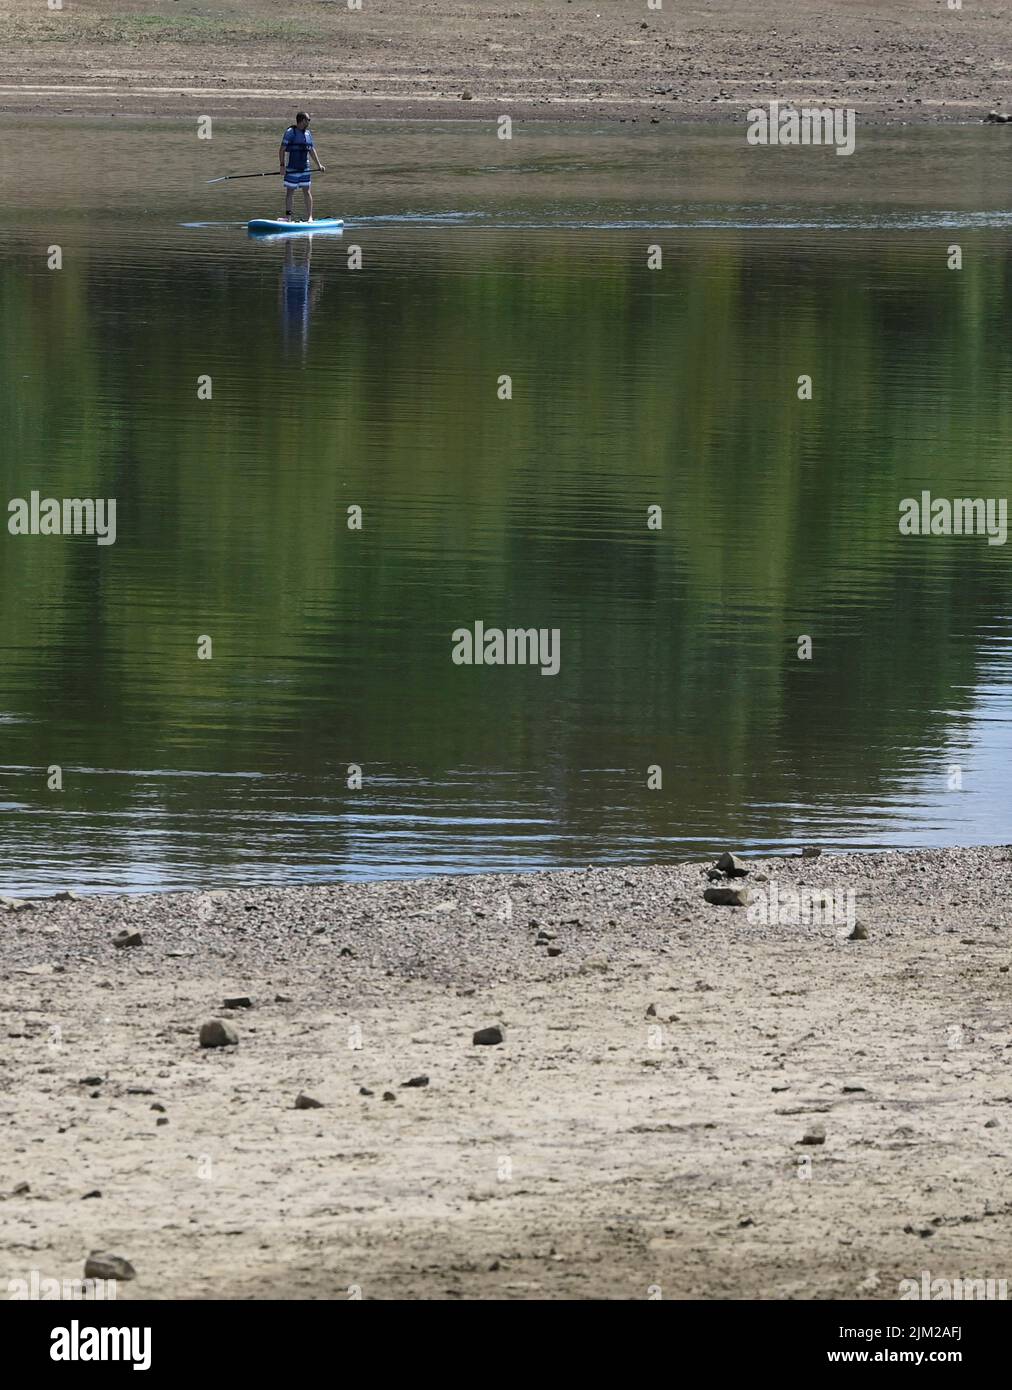 A man uses a paddle board as reduced water levels are seen at Ardingly Reservoir, ahead of regional restrictions over water usage being implemented in the hot and dry weather, Ardingly, southern Britain, August 4, 2022.  REUTERS/Toby Melville Stock Photo